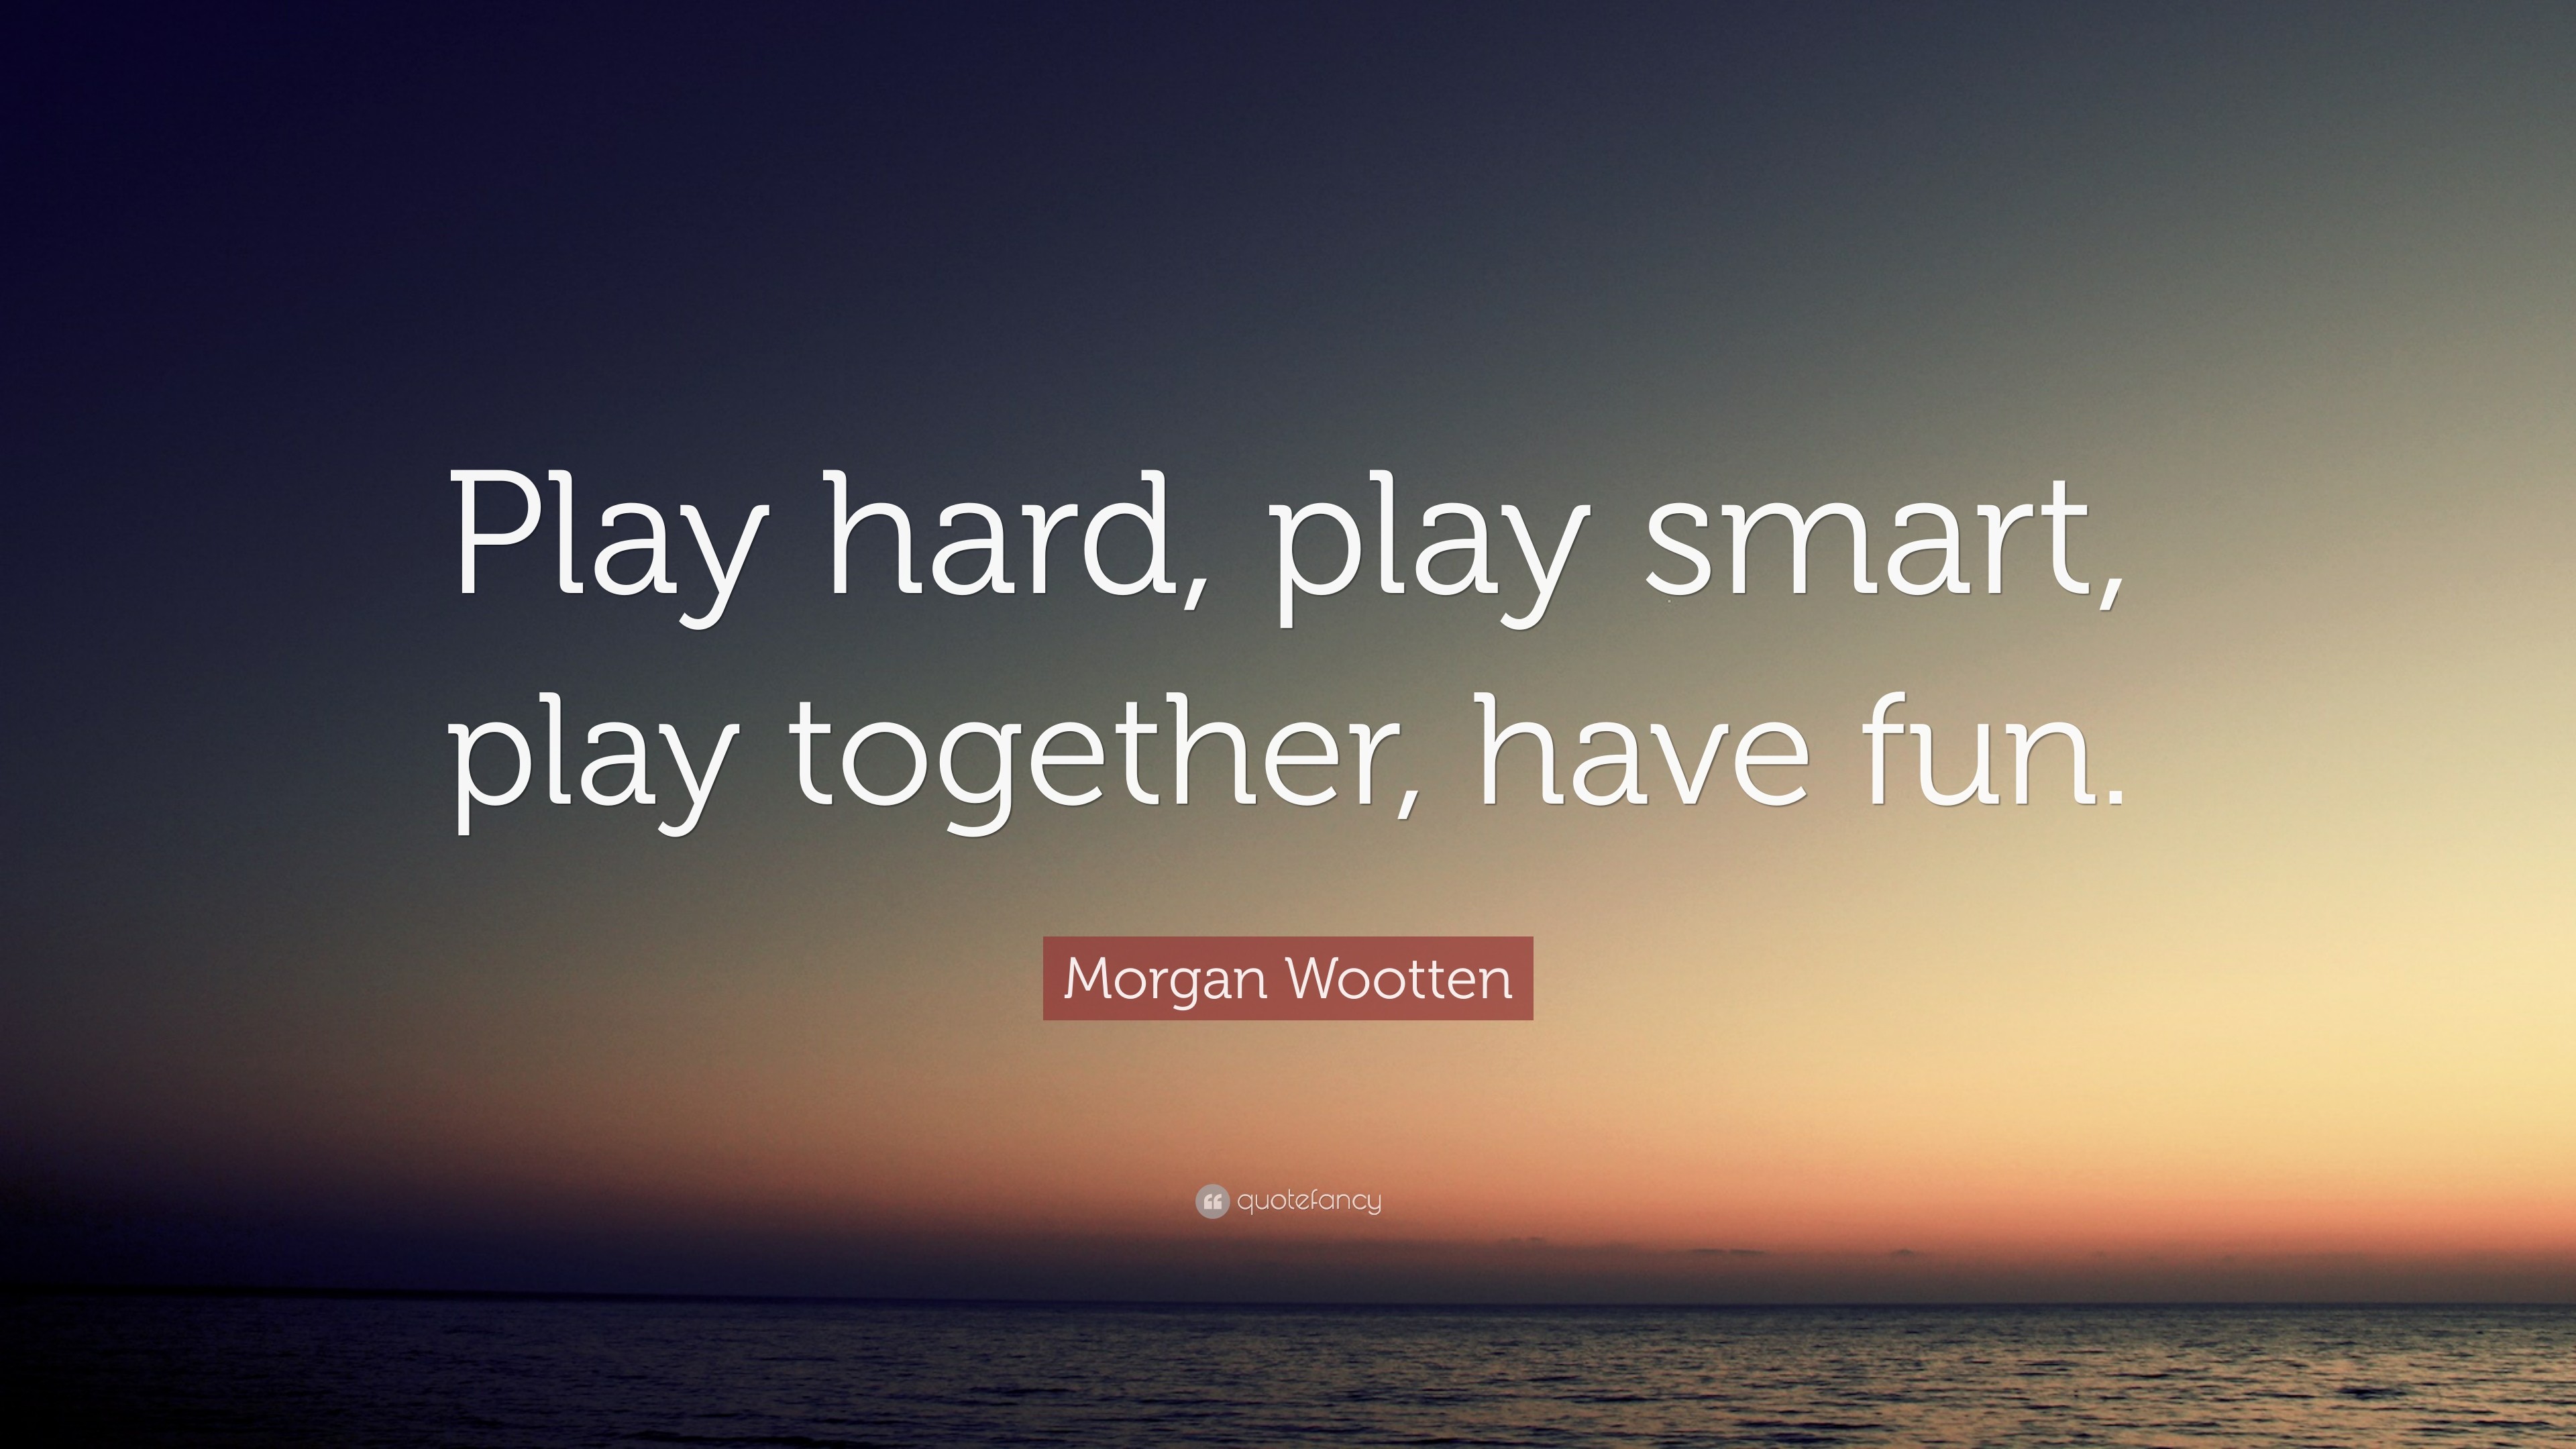 3840x2160 Morgan Wootten Quote: “Play hard, play smart, play together, have fun